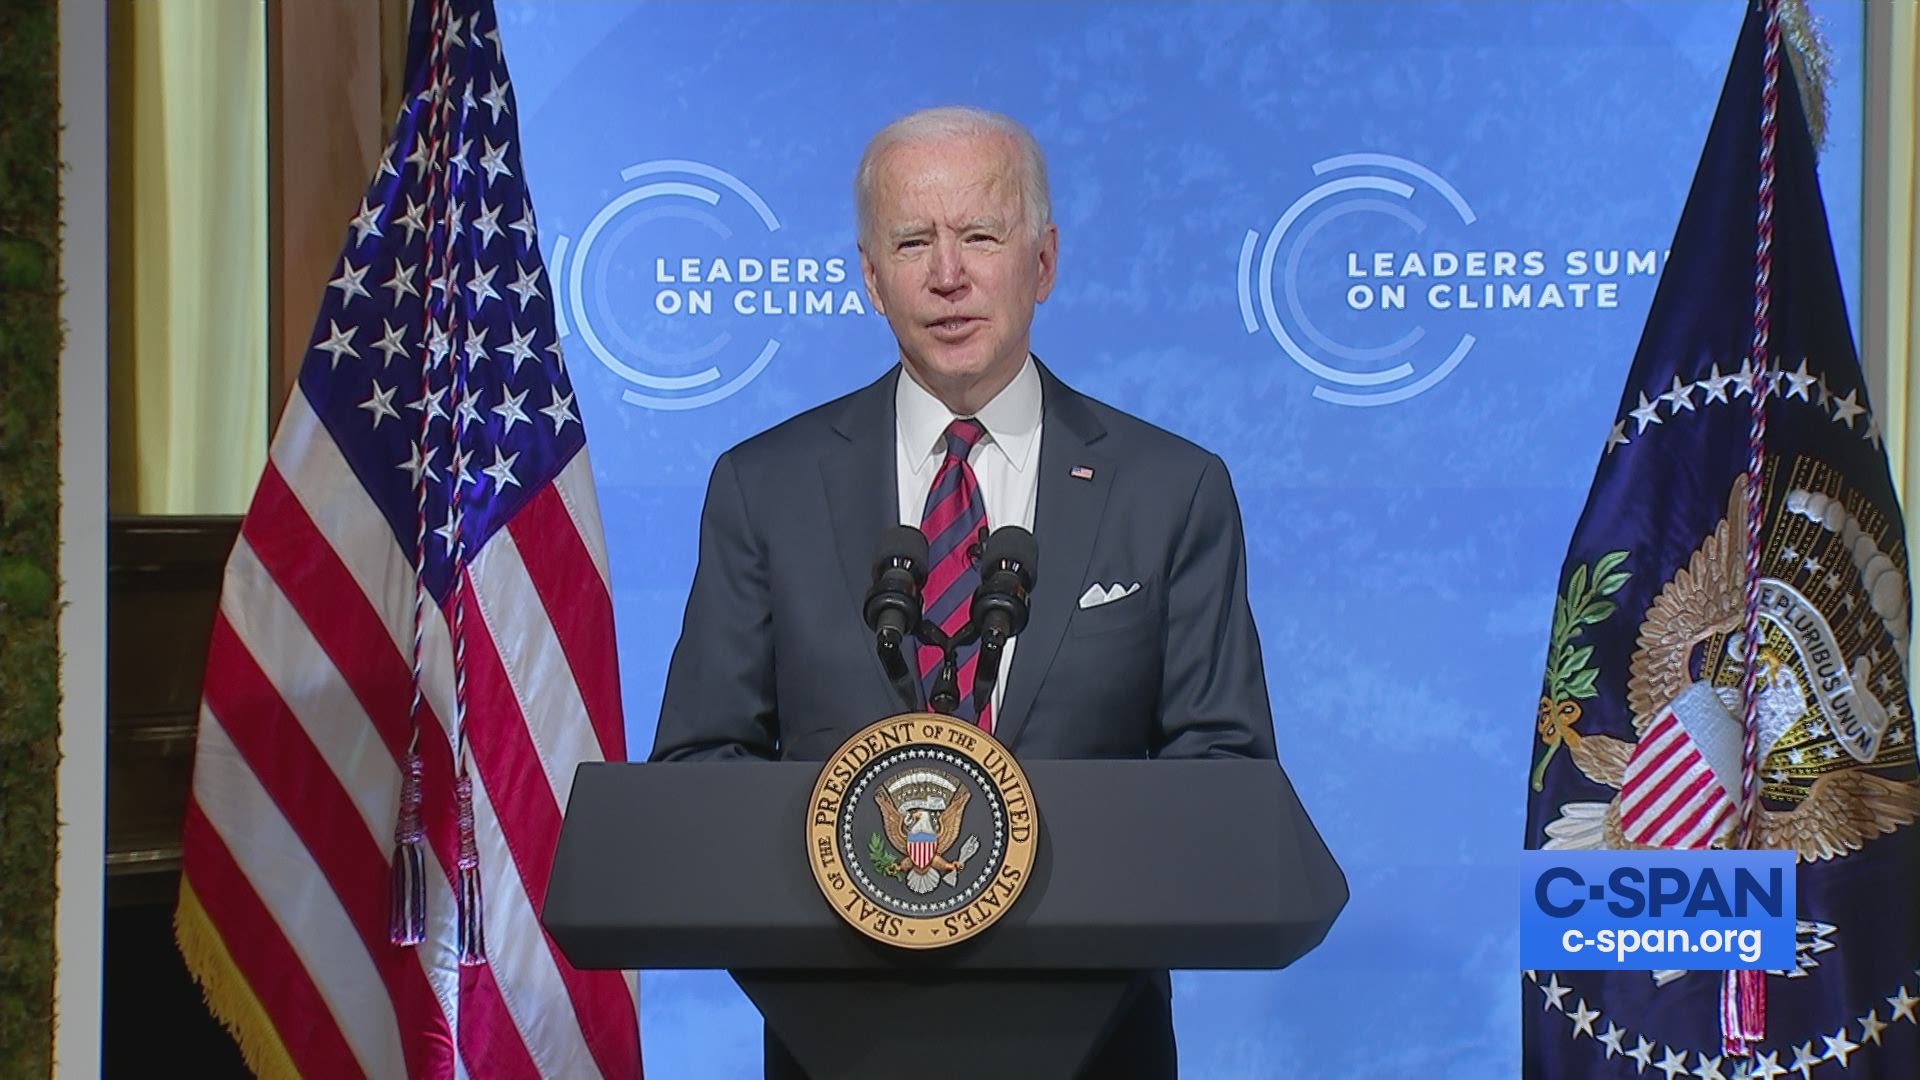 Amid Climate Crisis, Biden Stacks Administration With Fossil Fuel Industry Allies